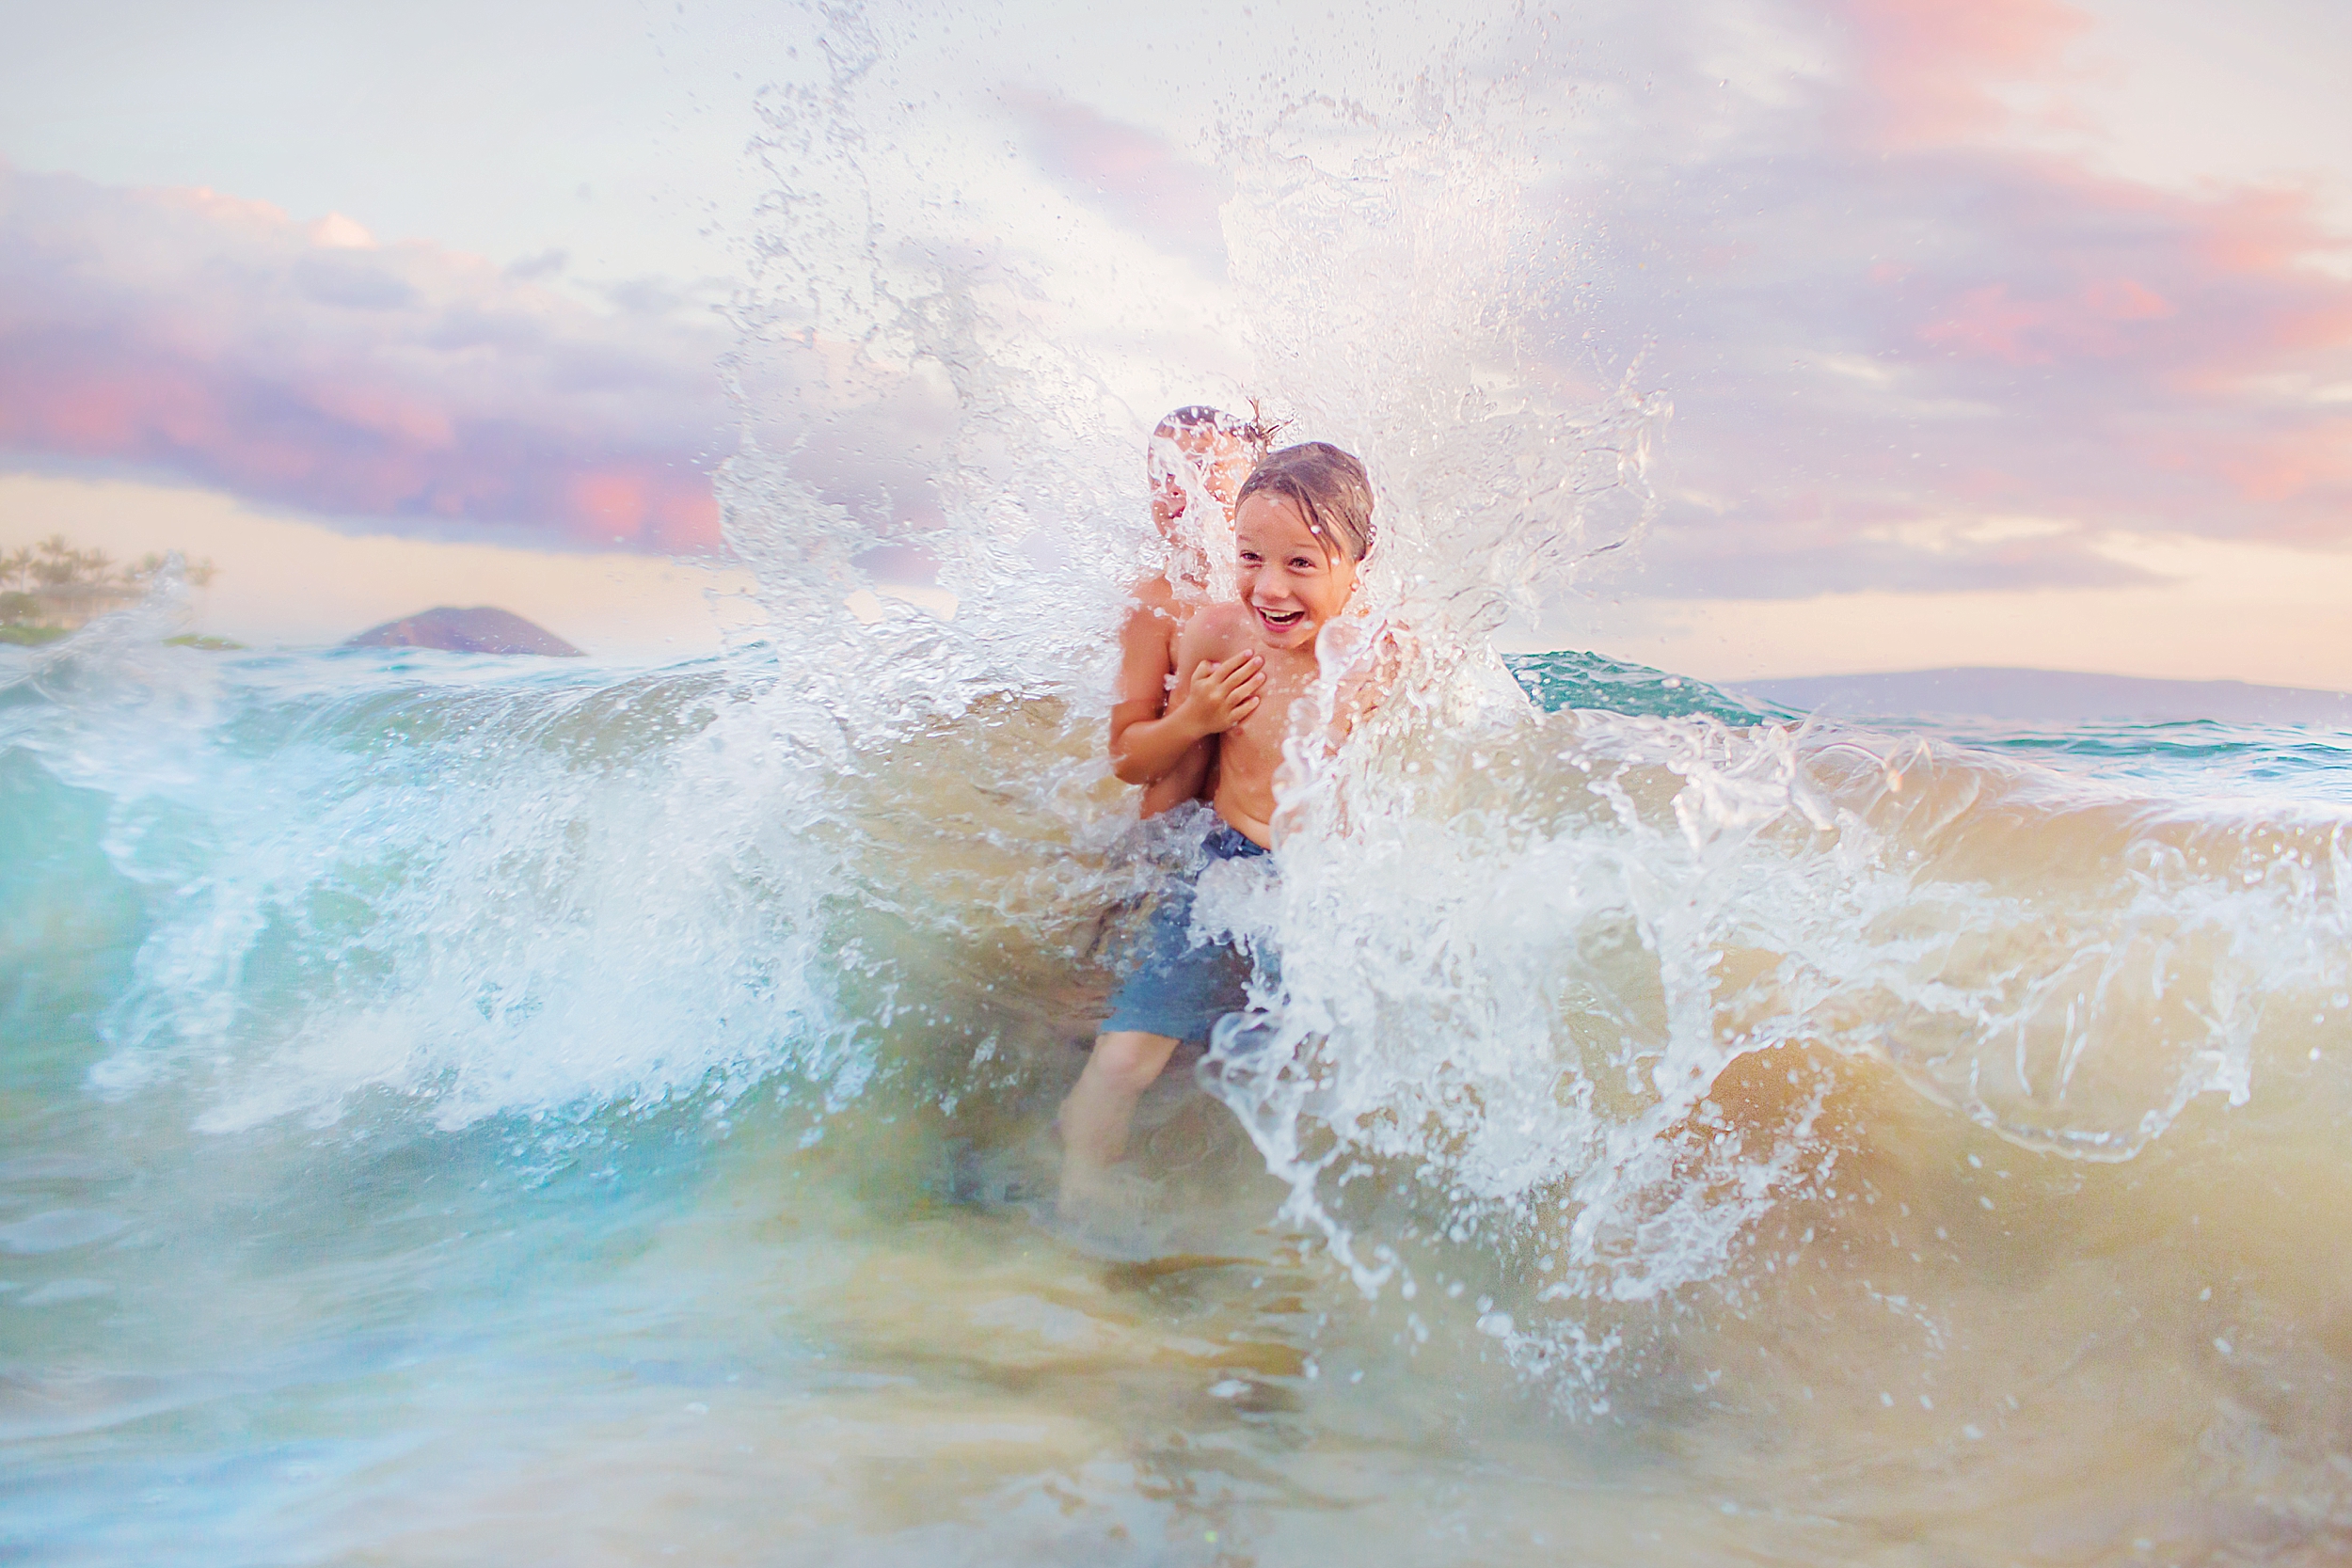 Two boys laugh and splash in the ocean on Maui during their love and water photography session